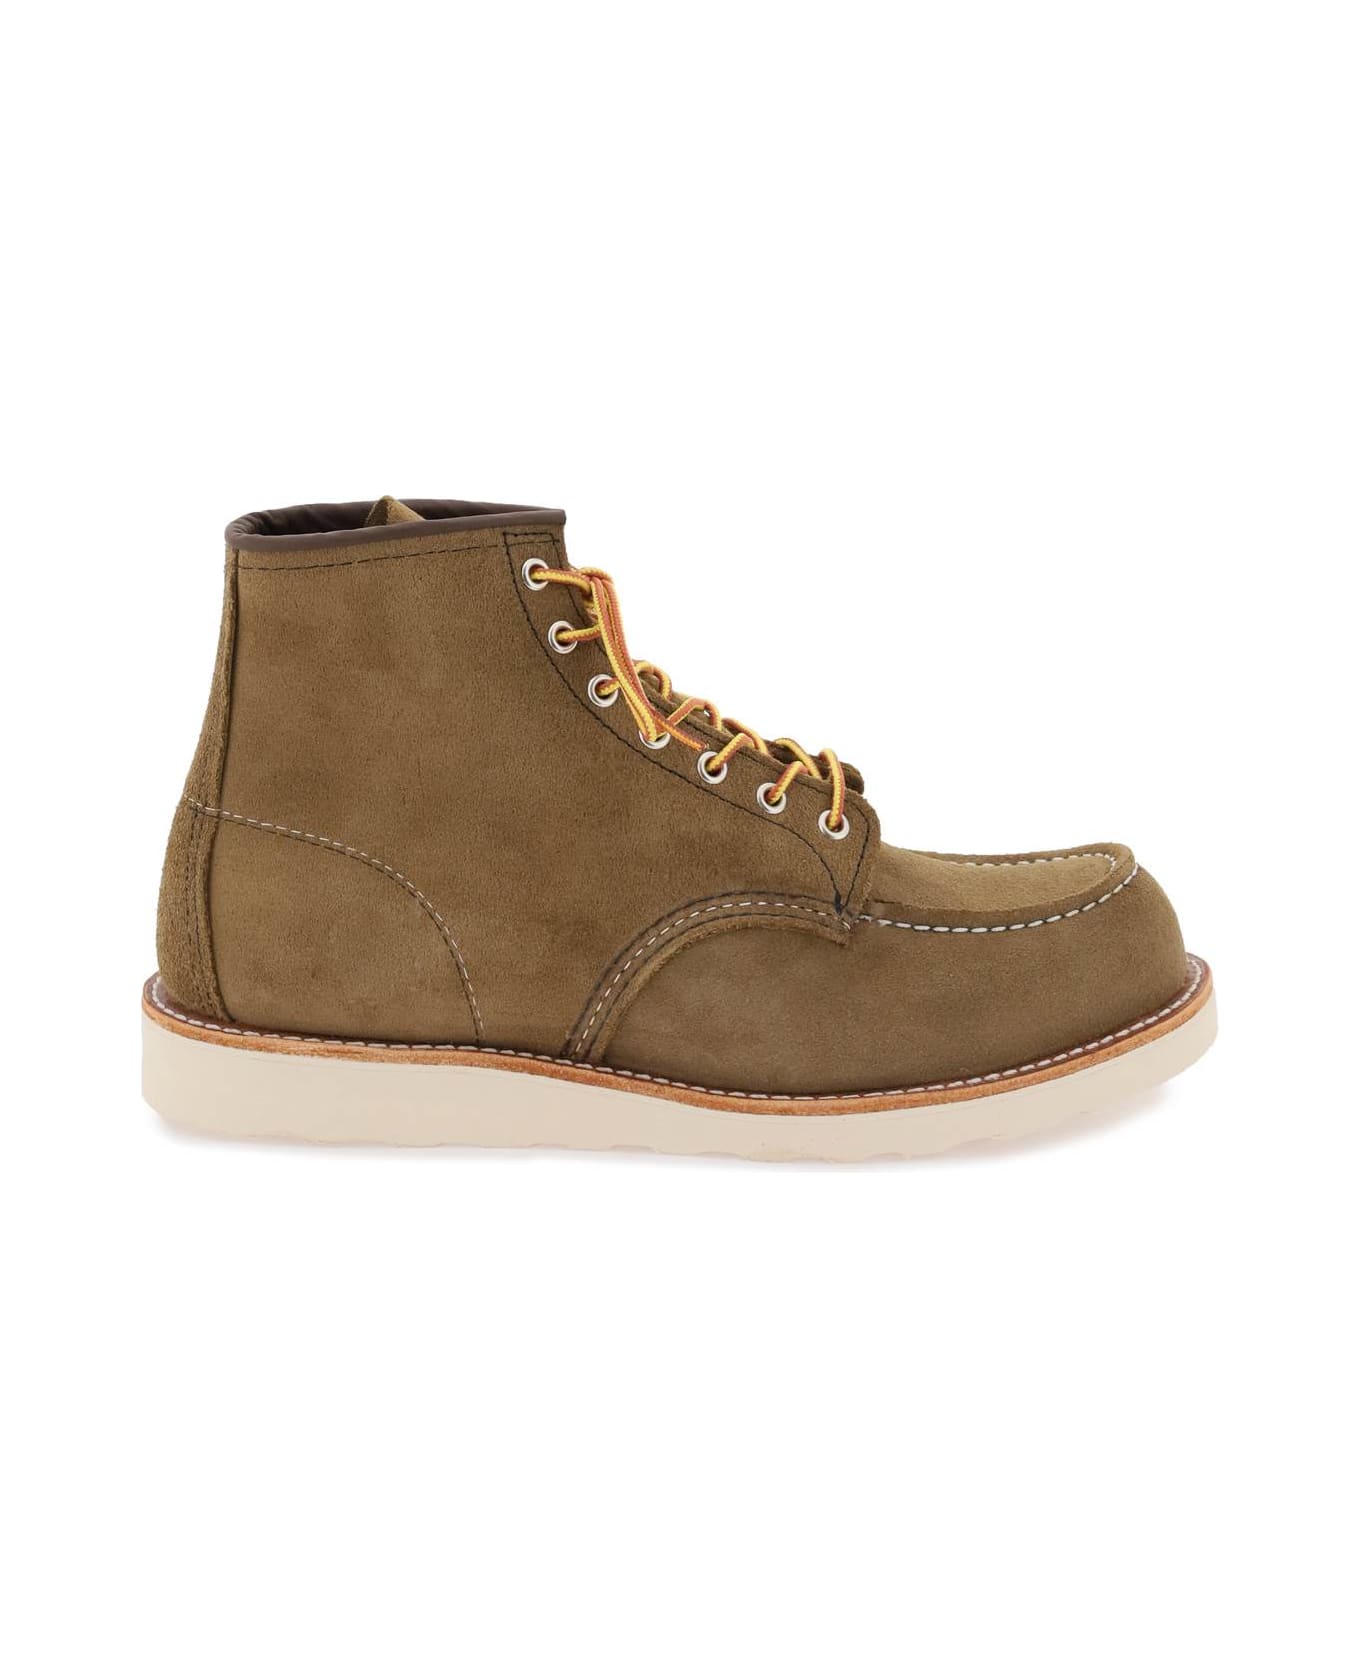 Red Wing Classic Moc Ankle Boots - OLIVE MOHAVE (Khaki)